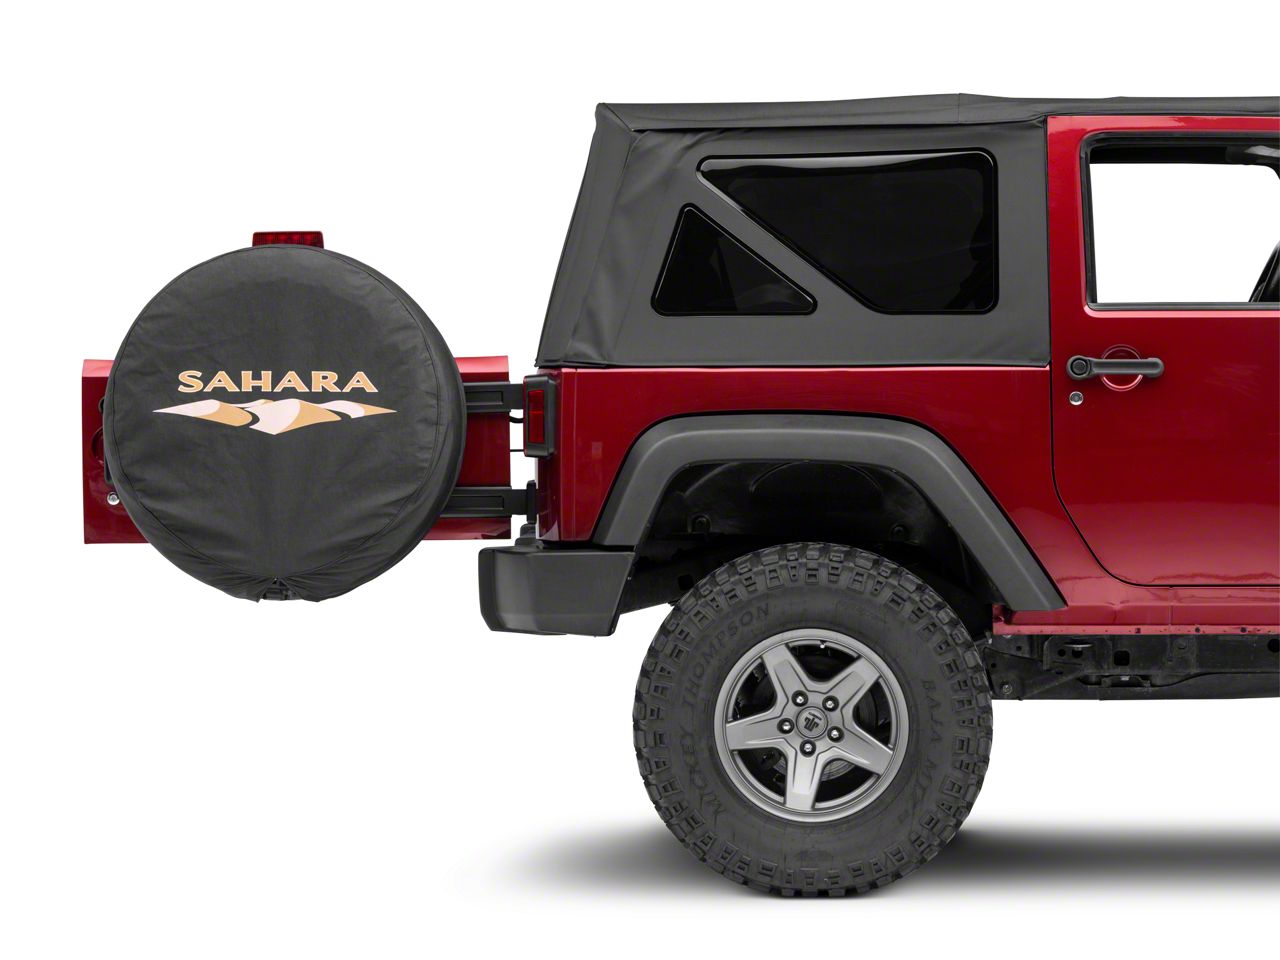 RED ROCK Outline Logo Spare Tire Cover; 30-Inch Tire Cover Compatible with 66-18 Jeep CJ5, CJ7, Wrangler YJ, TJ ＆ JK - 4